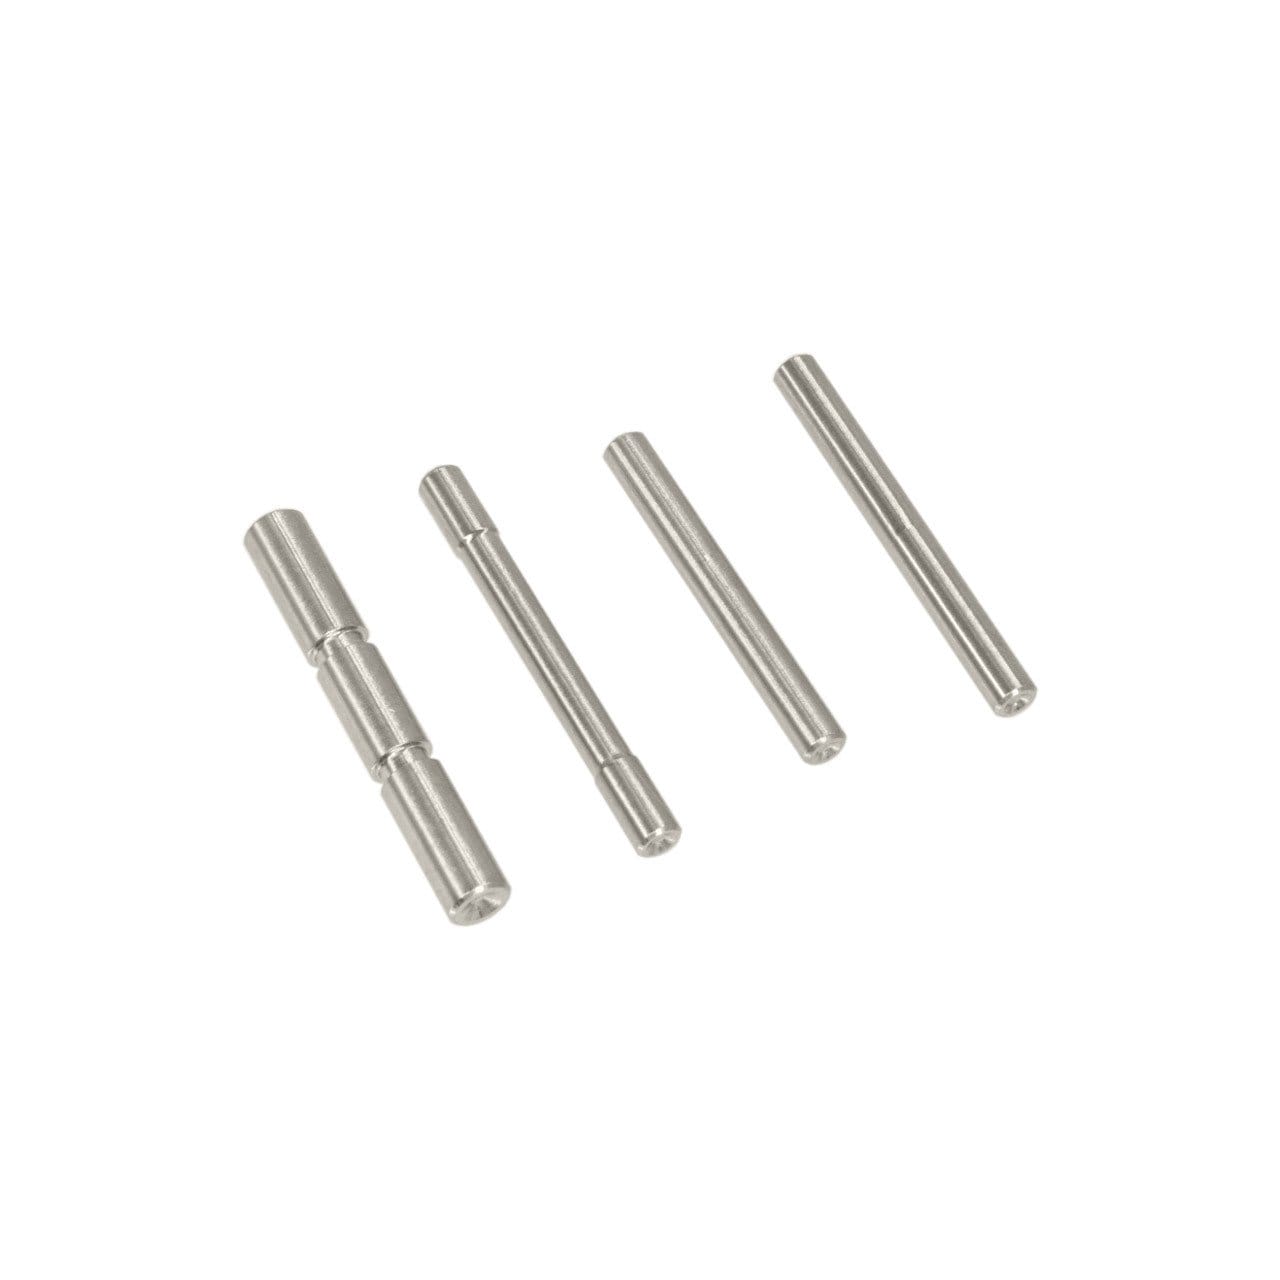 Image of ROOK Tactical Polymer80 "Perfect Fit" Dimpled Pin Kit (PF45) - Stainless Steel